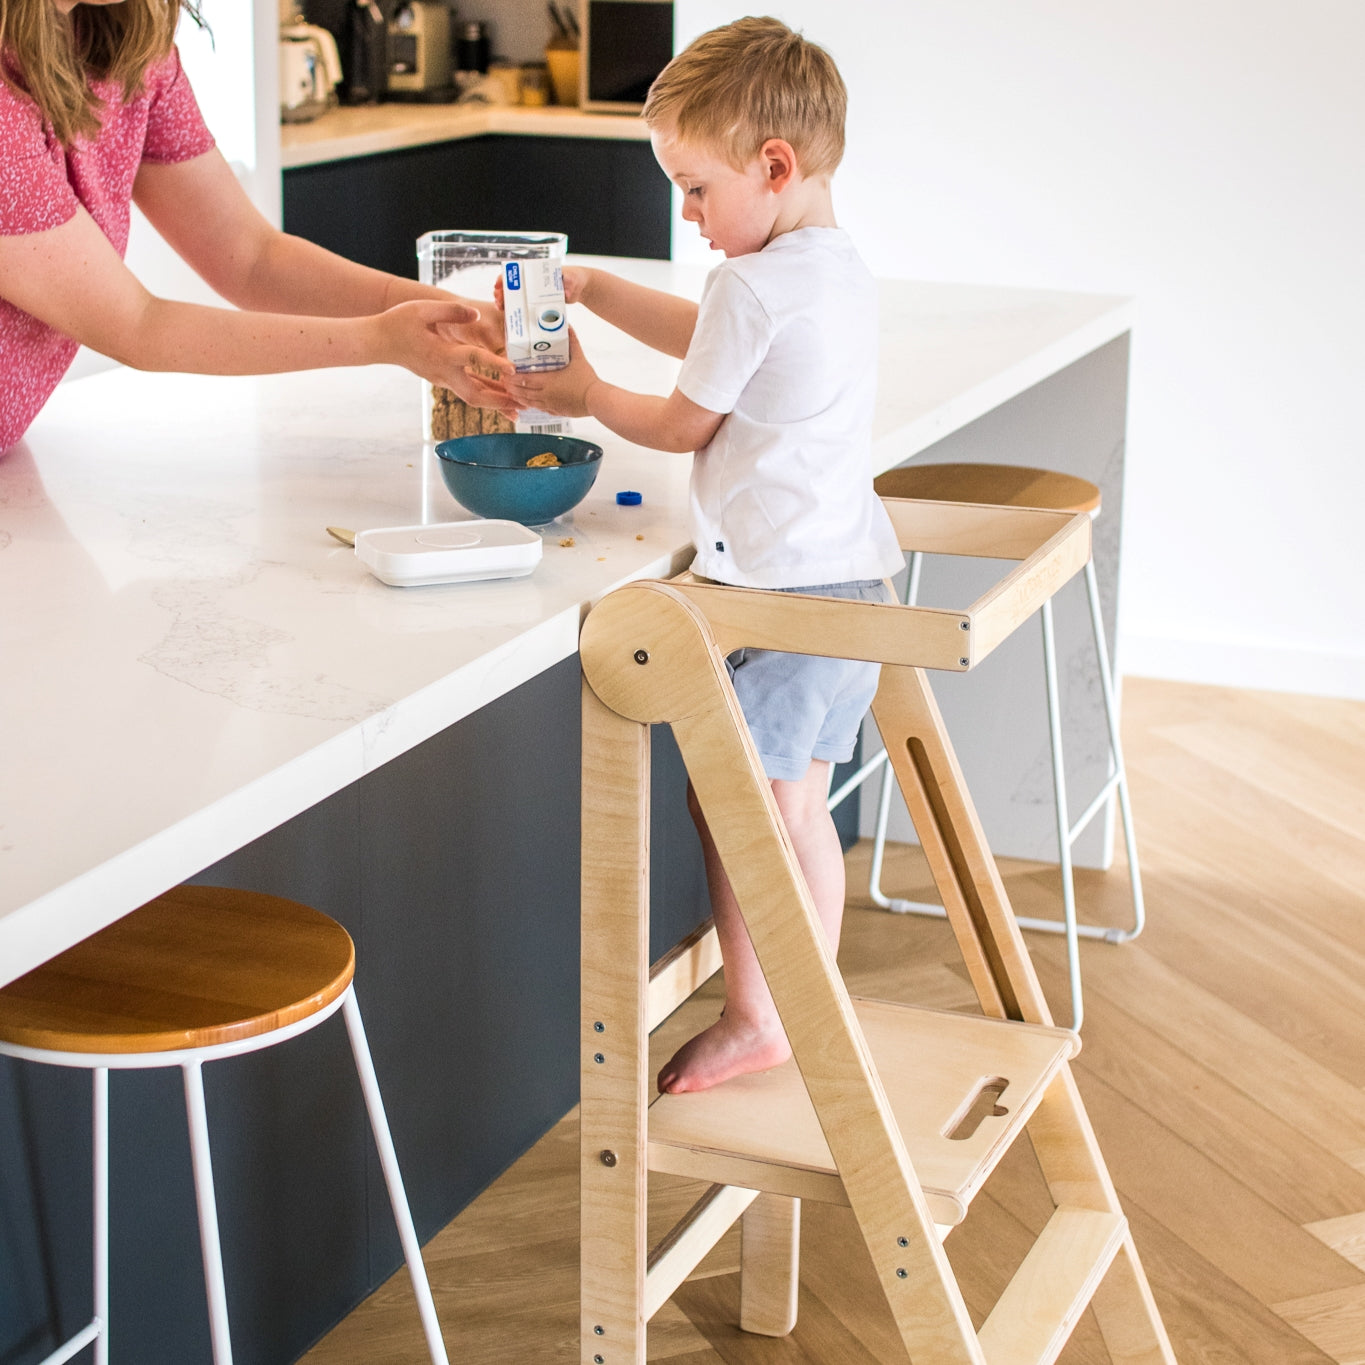 Folding Learning Tower Code CORE $15 off